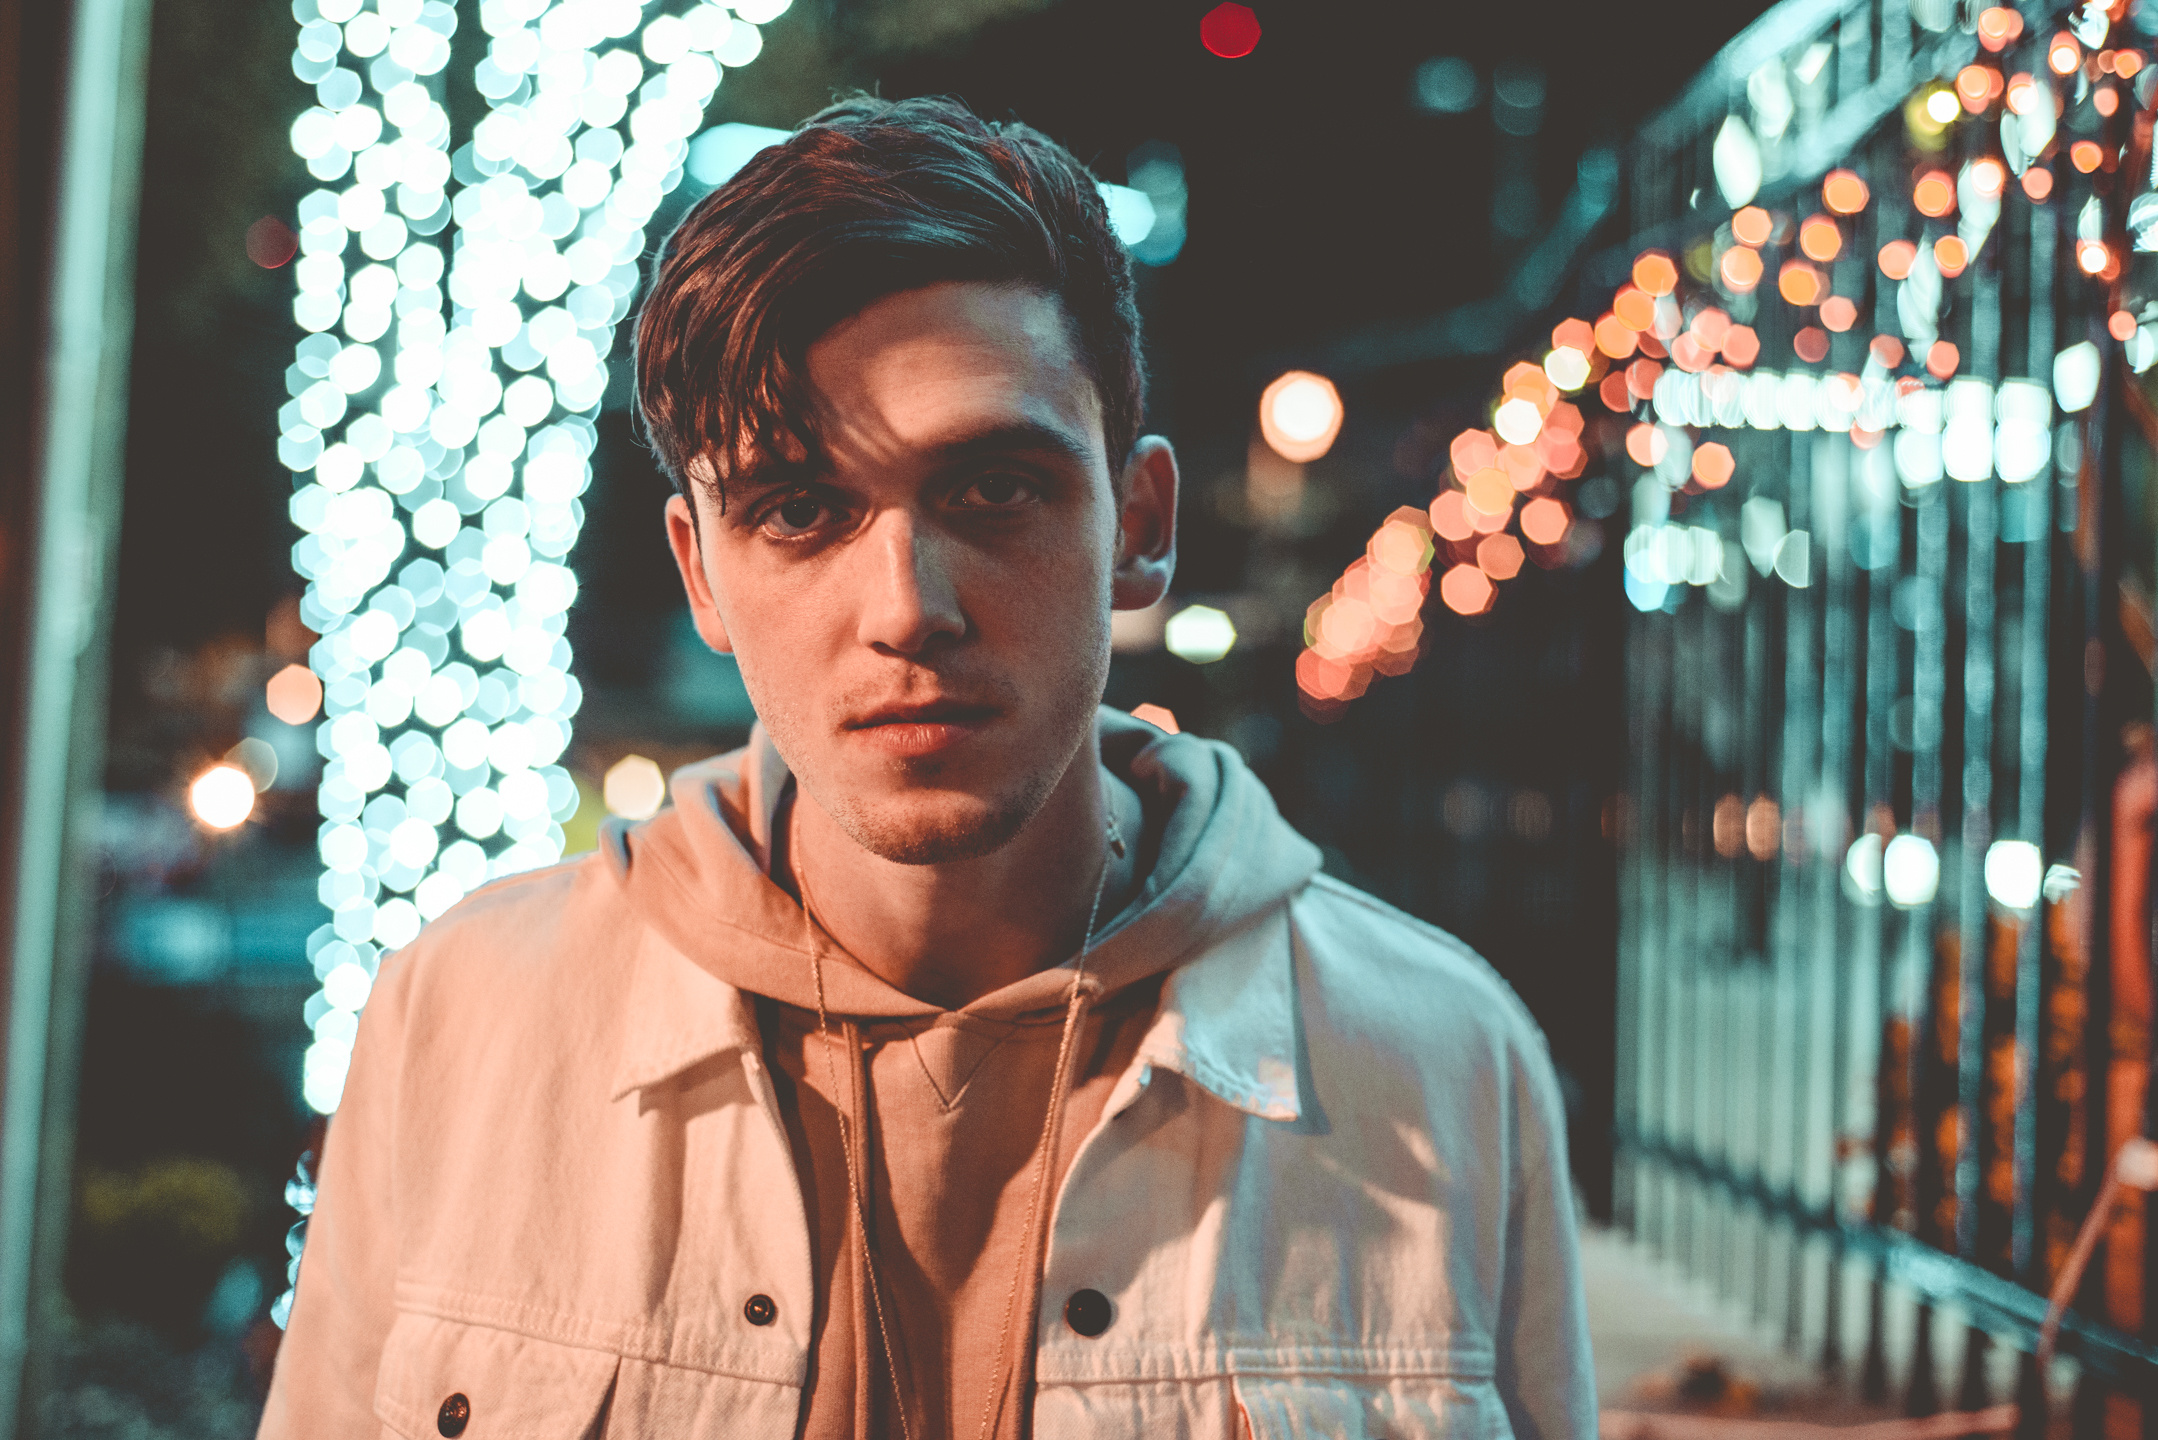 Lauv, I Met You When I Was 18 playlist, New songs, 2160x1440 HD Desktop